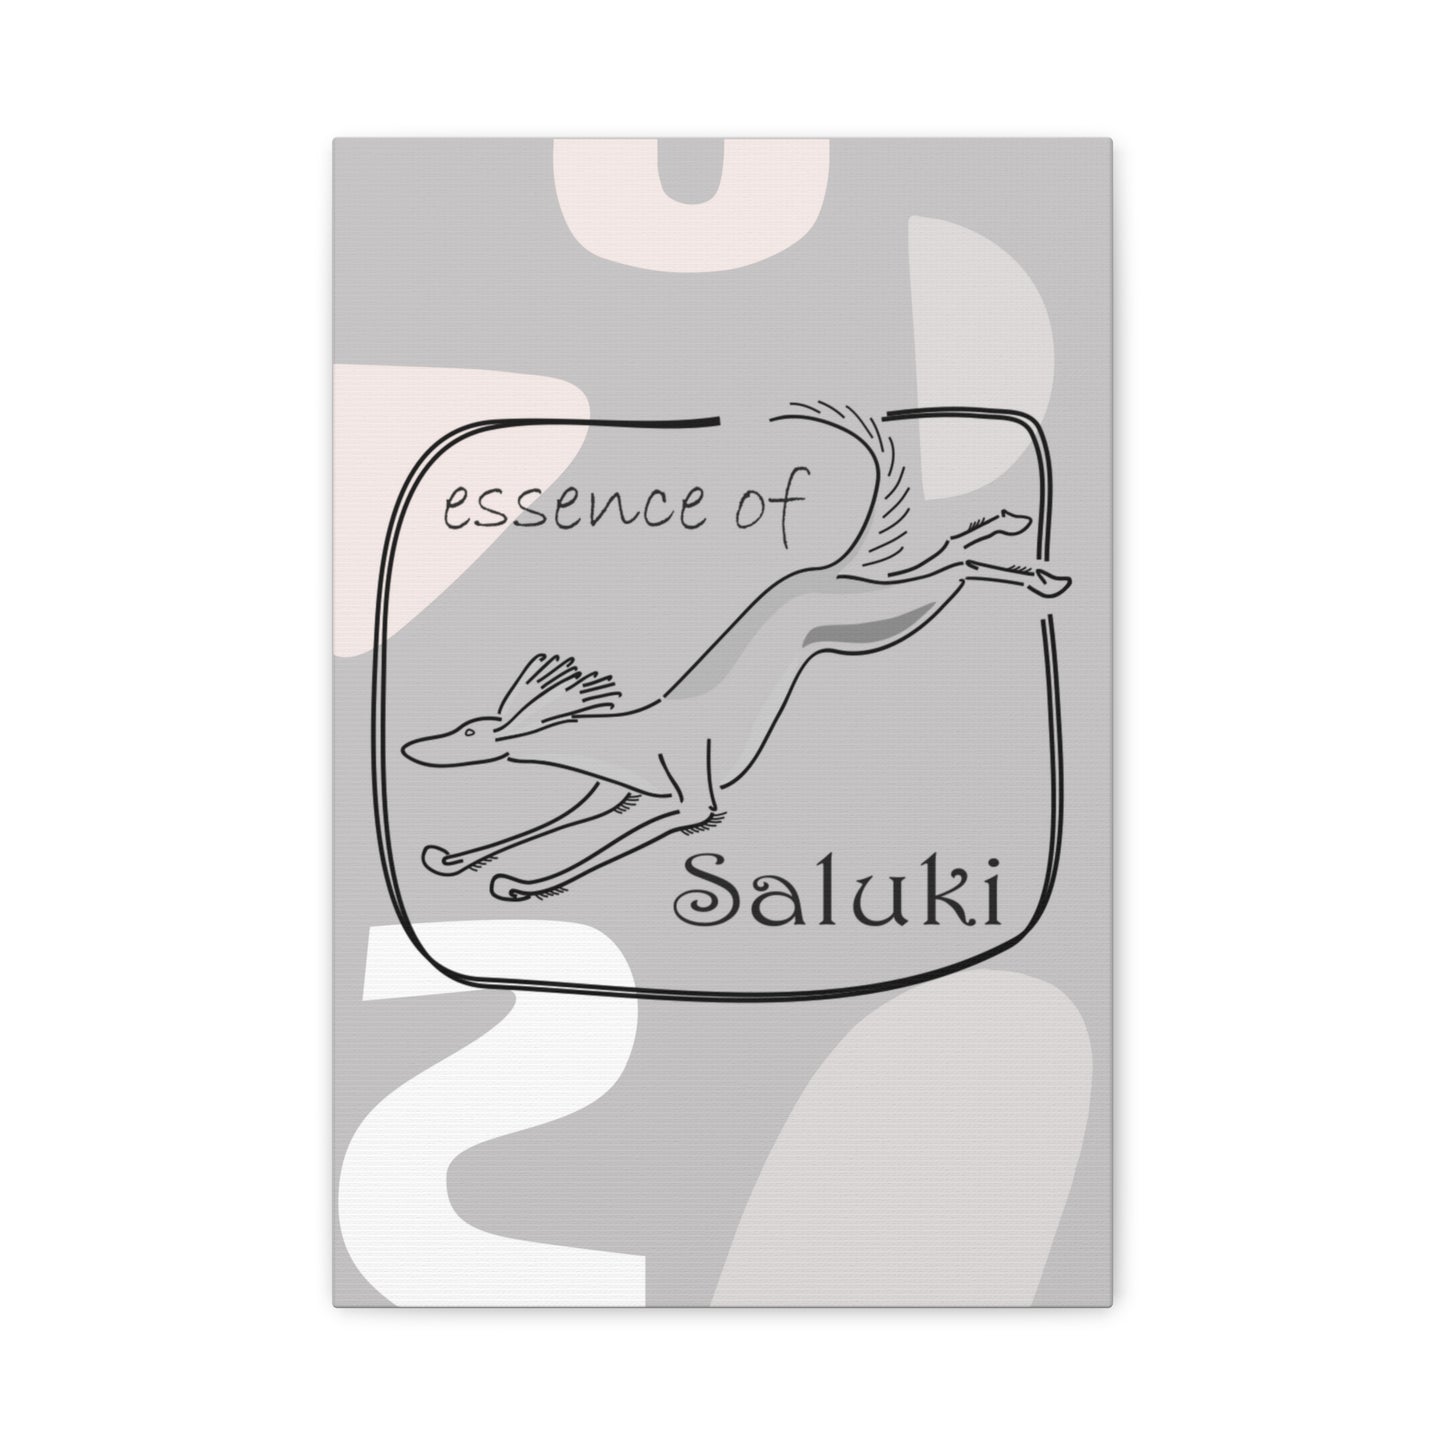 SALUKI ART IN MINIMALIST LINE ART STYLE on a Matte Canvas with Background Color, Stretched, 1.25"